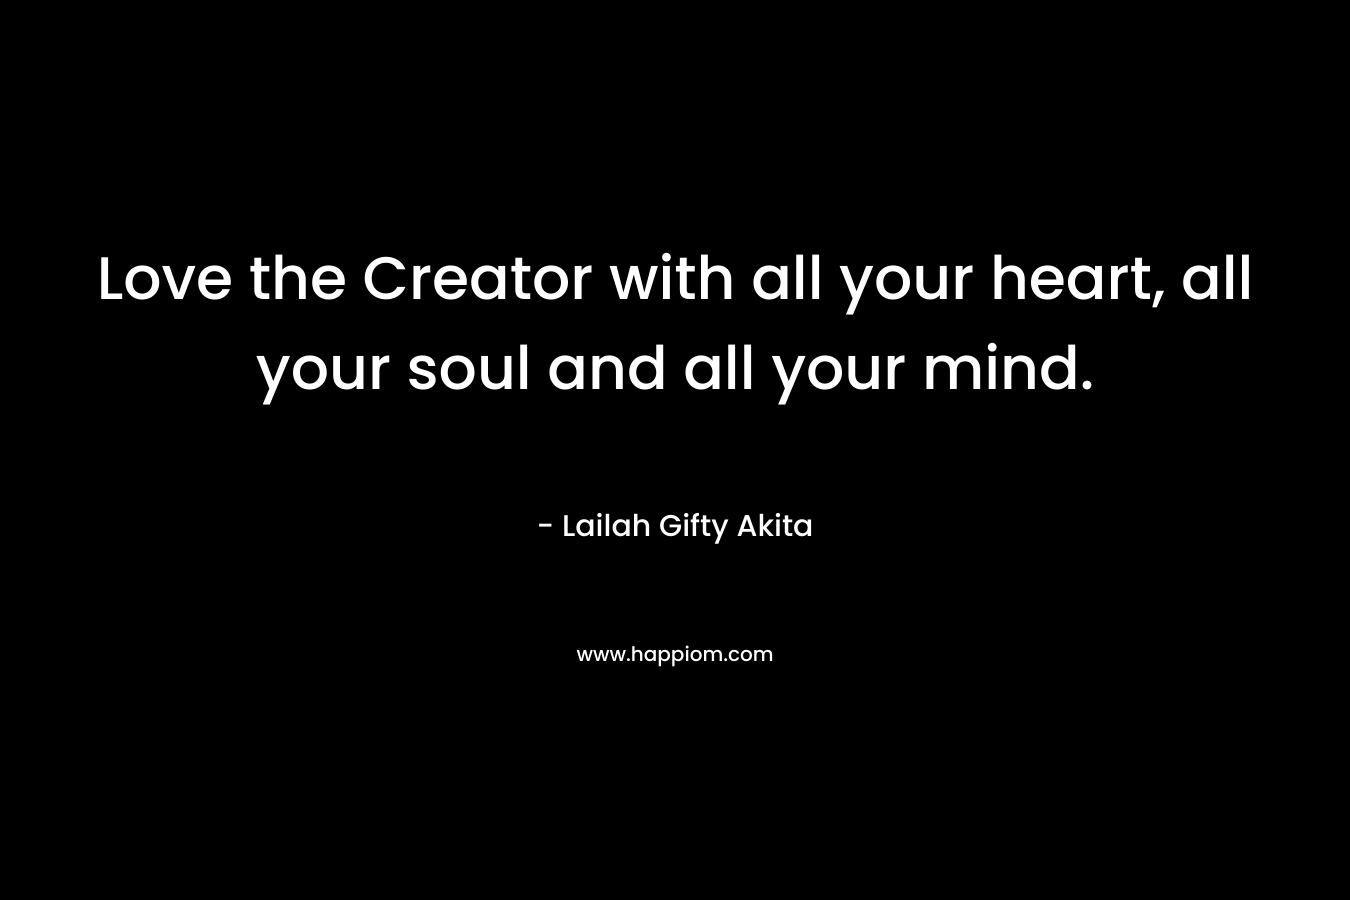 Love the Creator with all your heart, all your soul and all your mind.